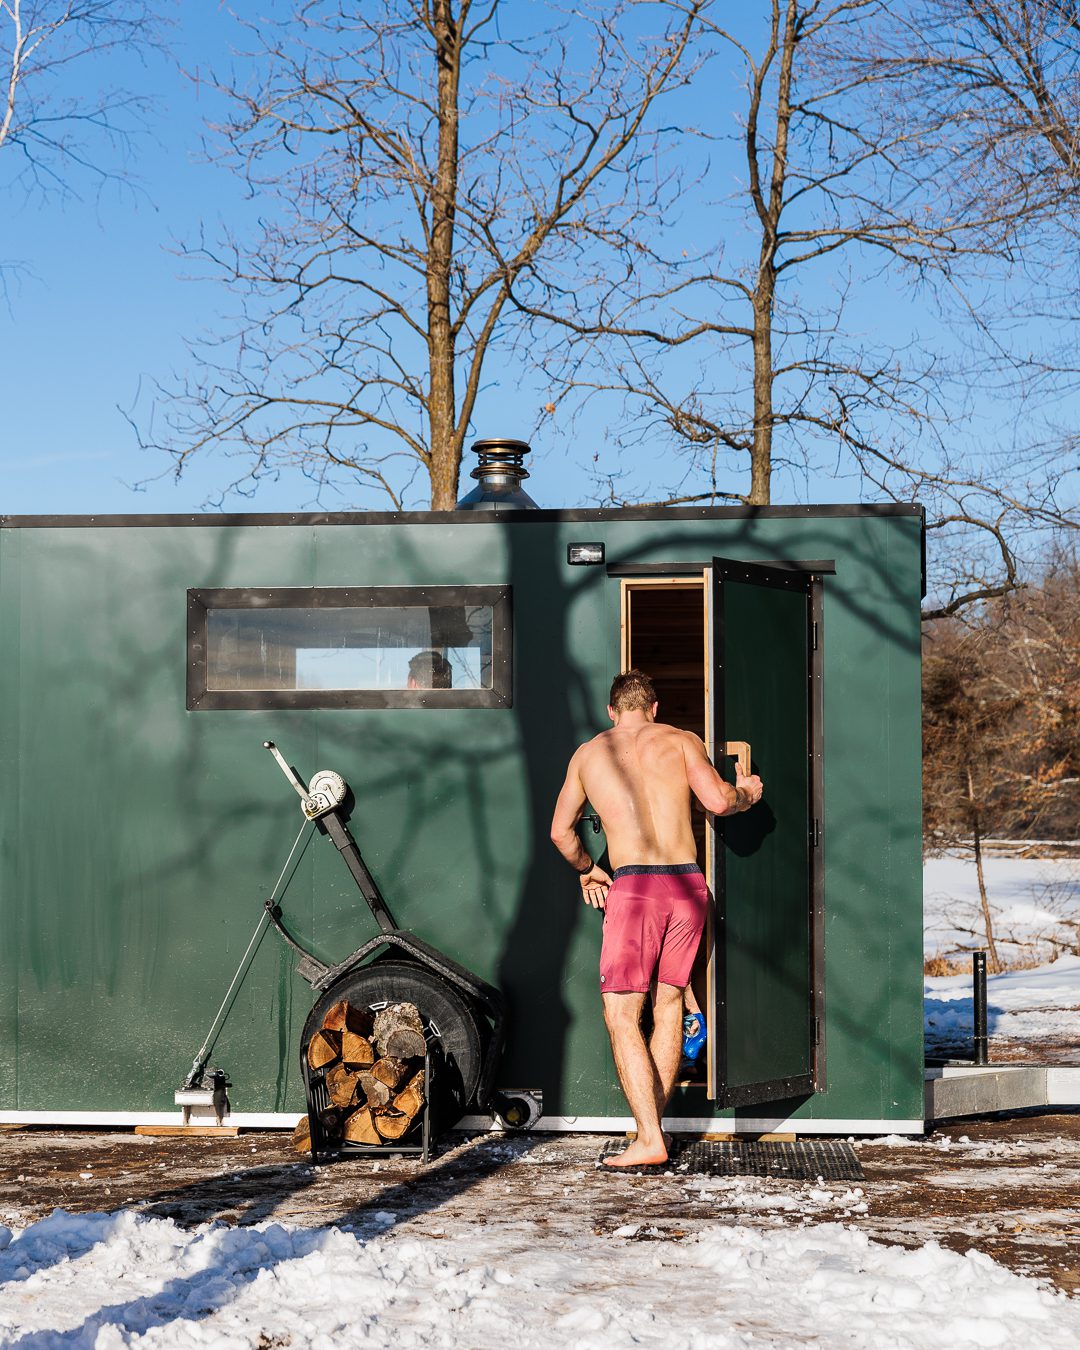 Getting into a mobile sauna in Minnesota during the winter